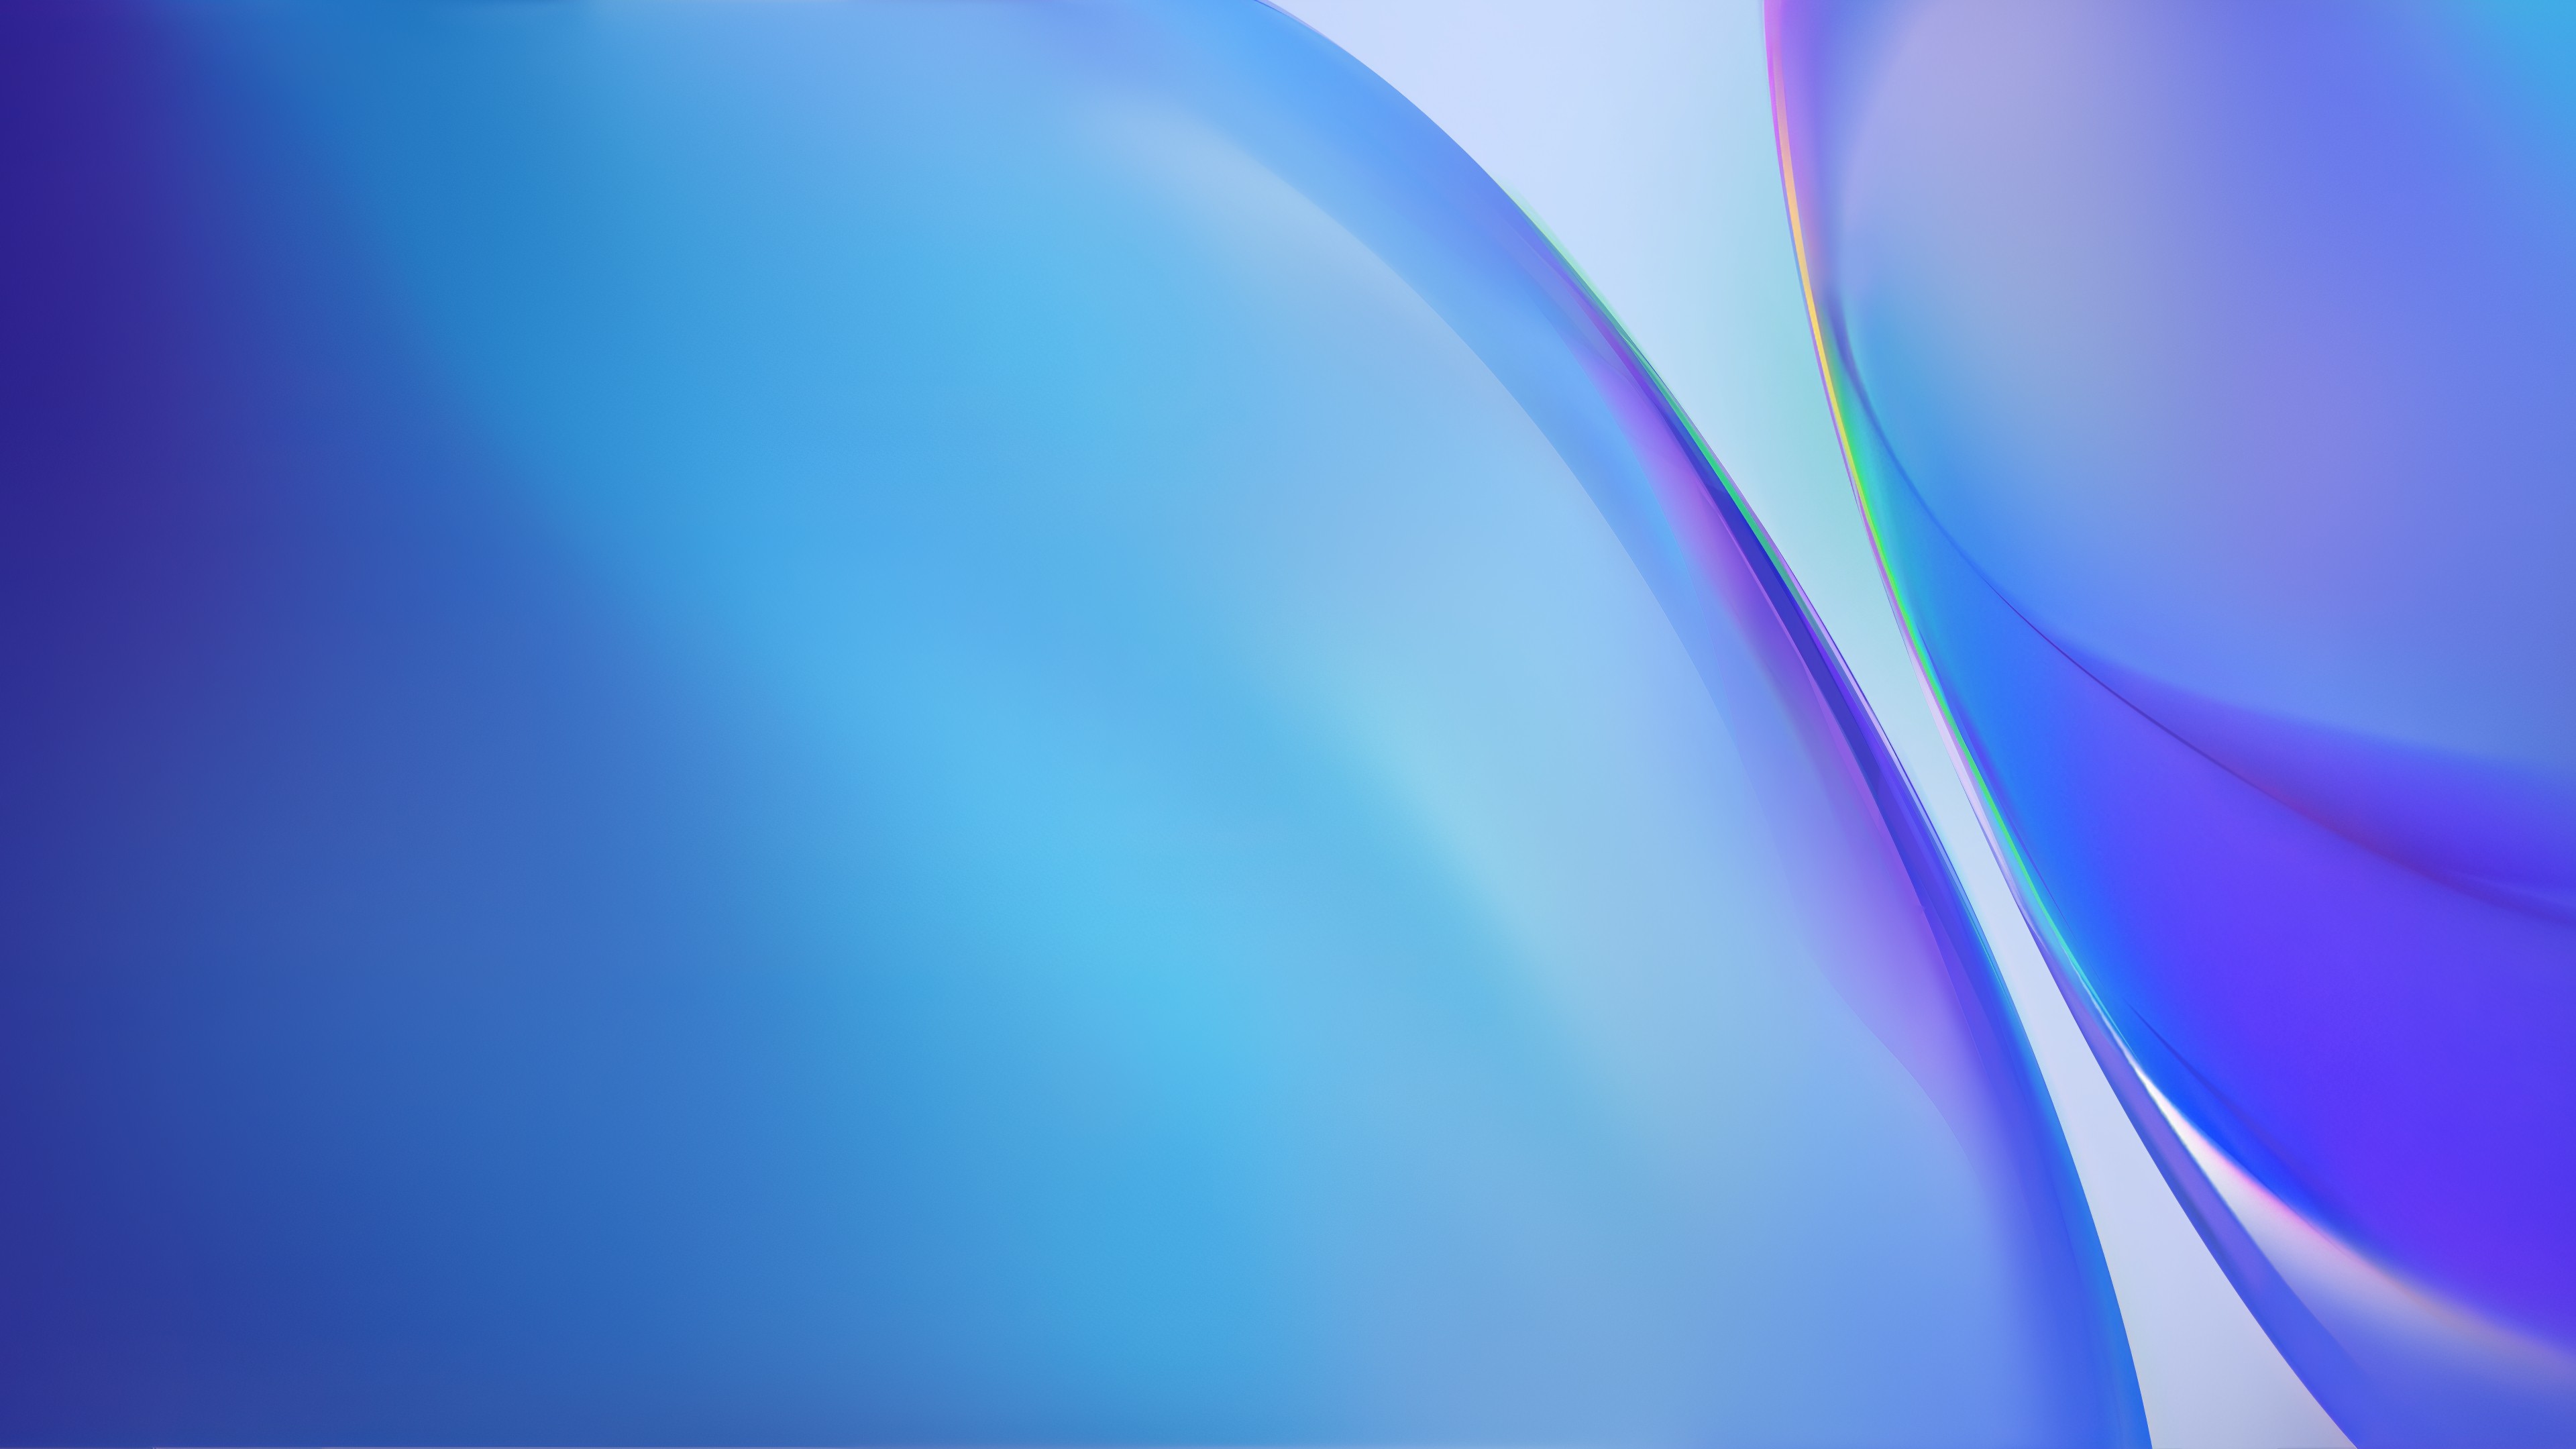 Abstract Shapes Digital Art Blue Turquise 3840x2160